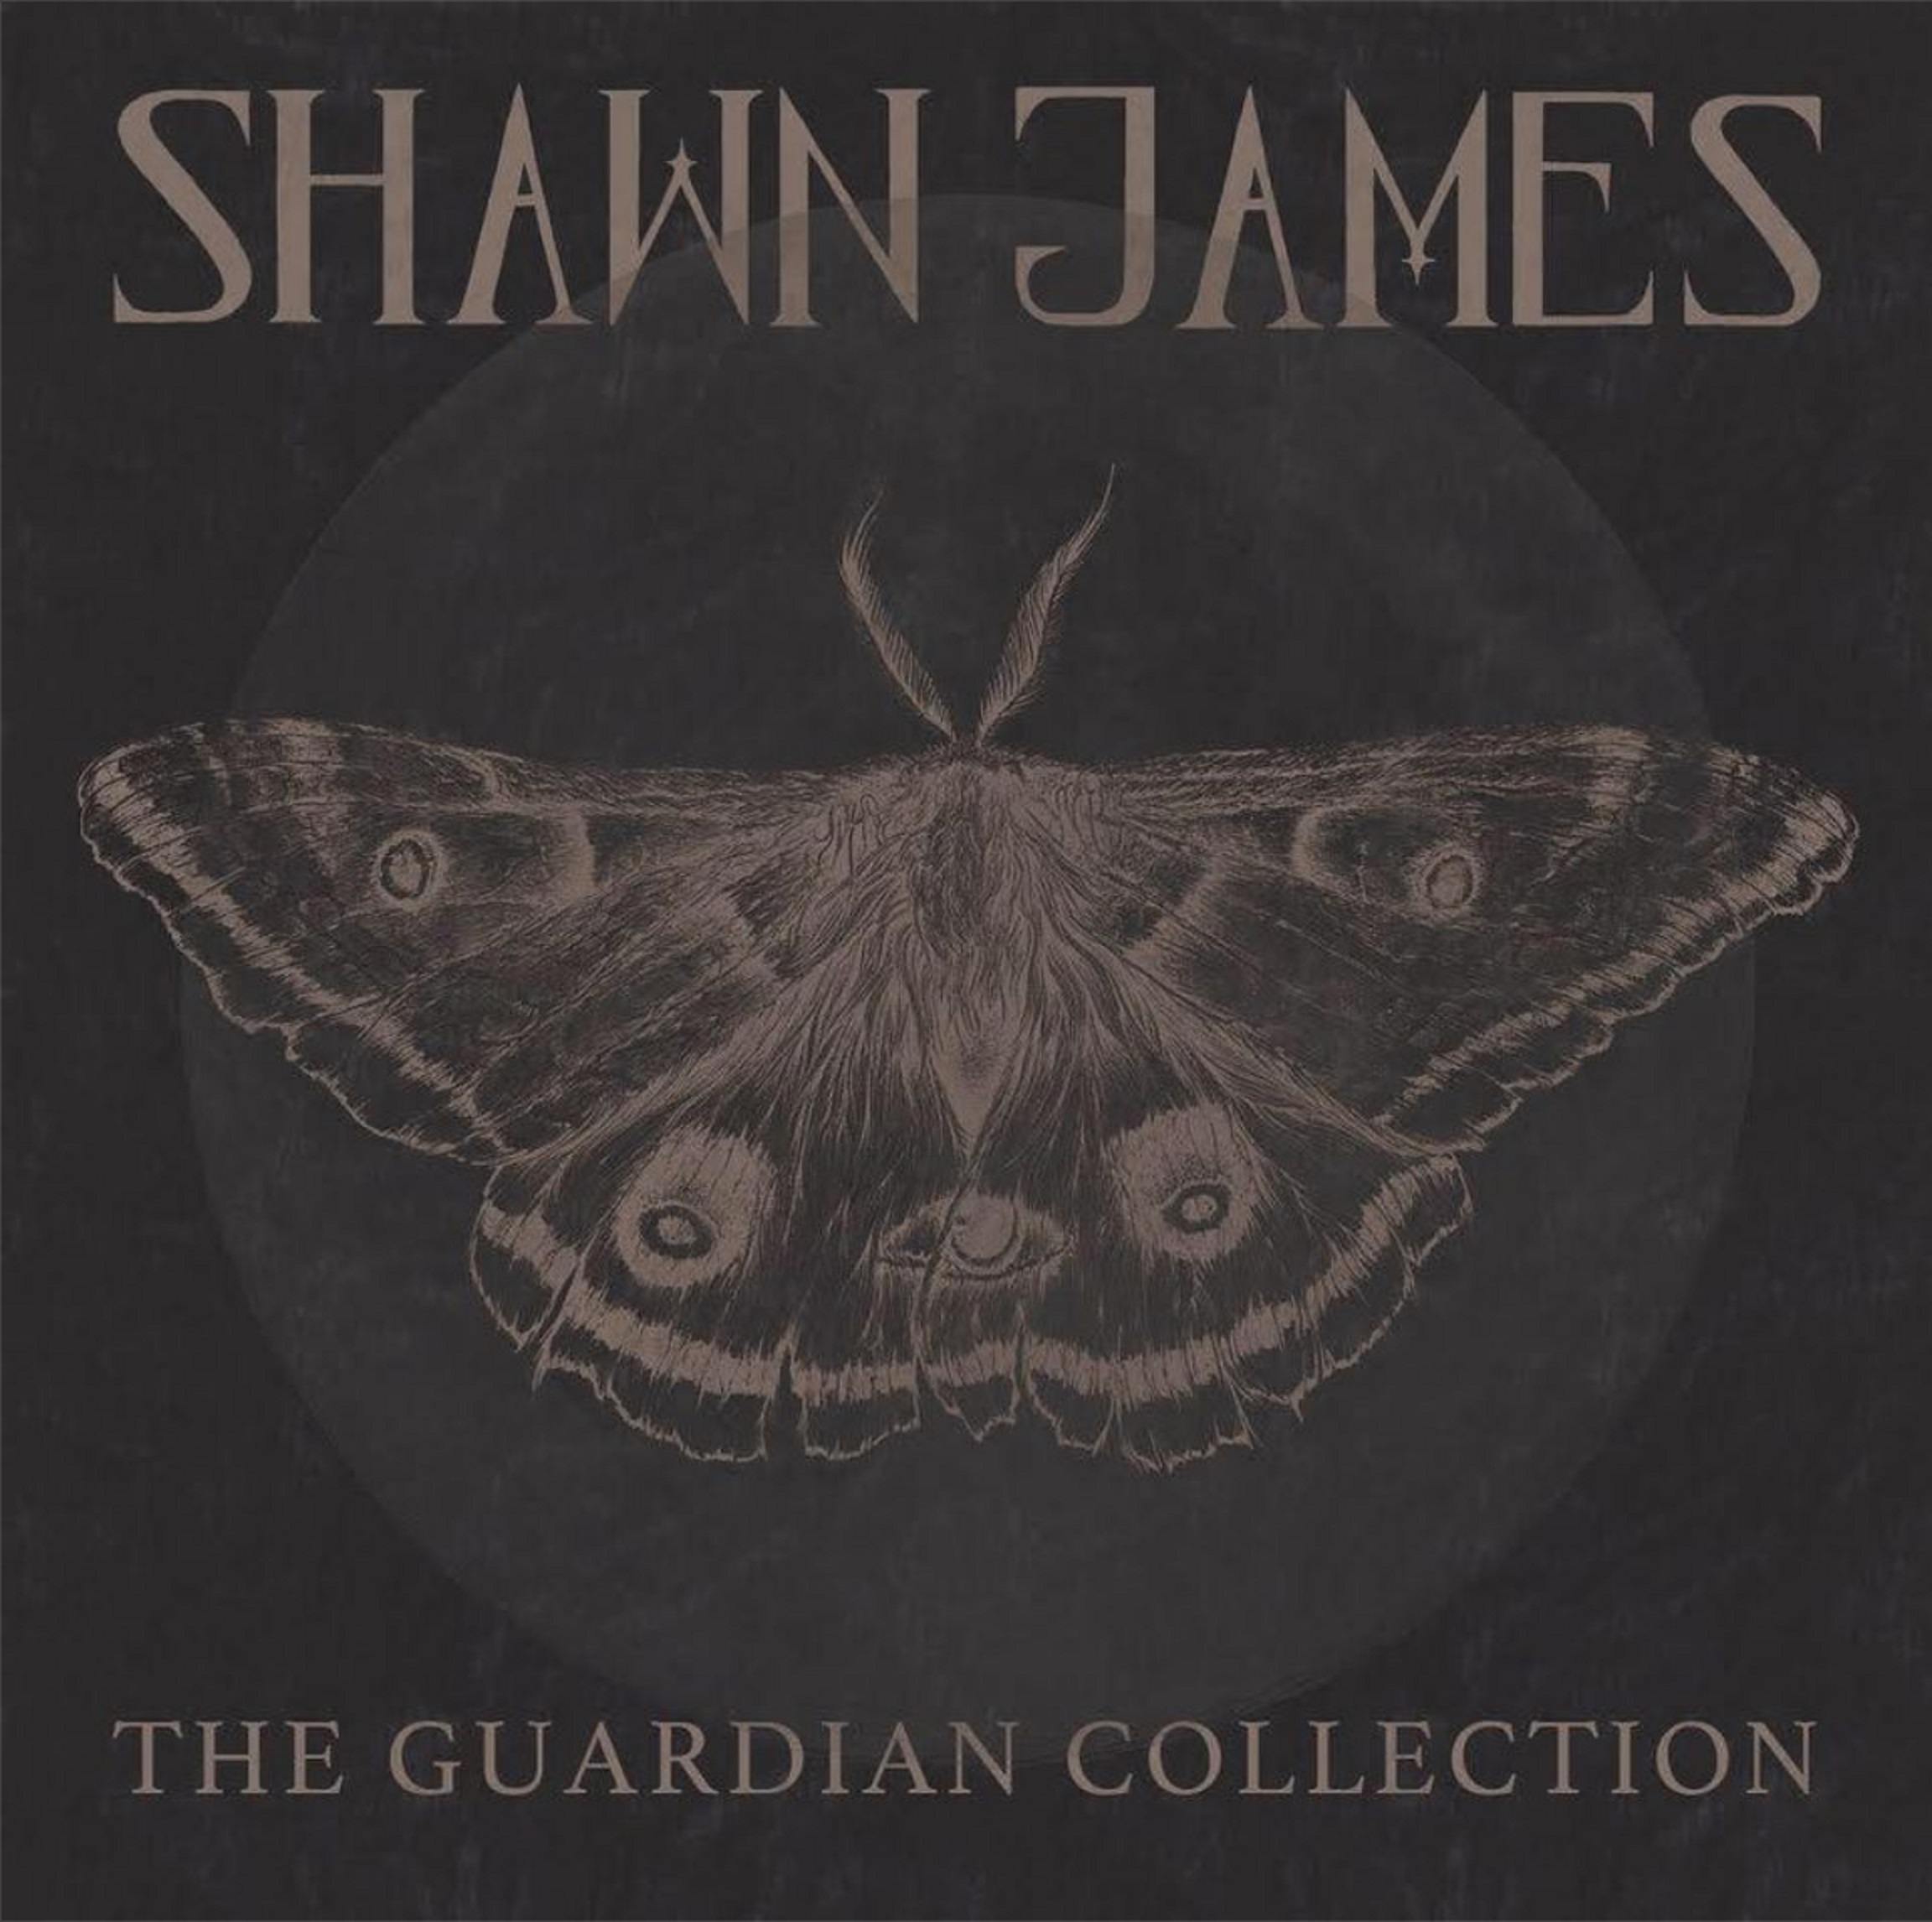 Shawn James "The Guardian Collection" out now